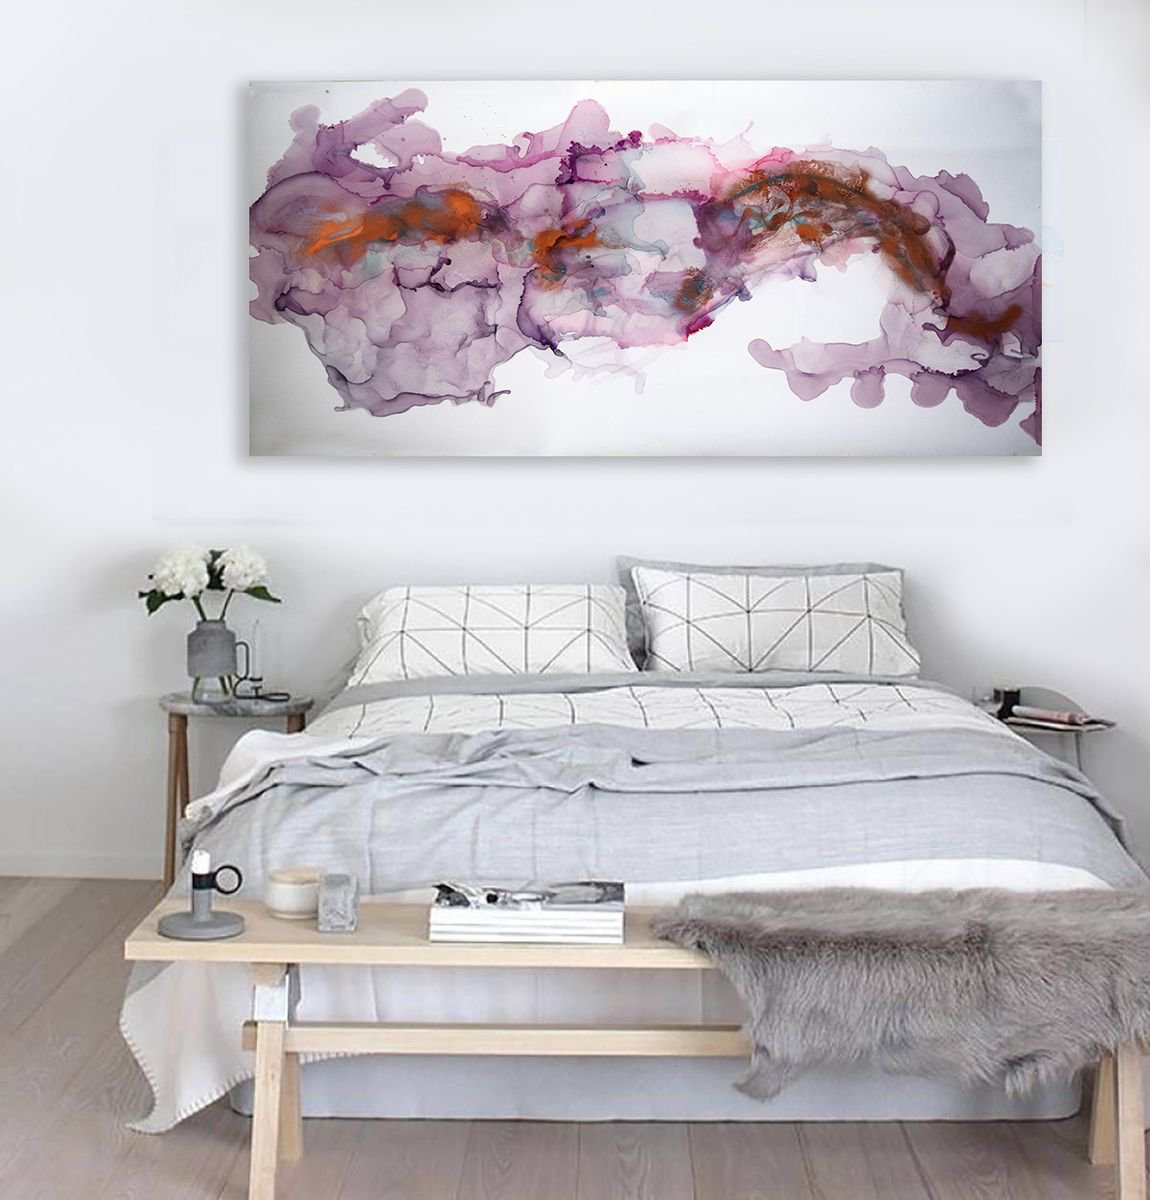 FREE SHIPPING Through the clouds 90 cm x 43 cm / Abstract painting by Anna Sidi-Yacoub